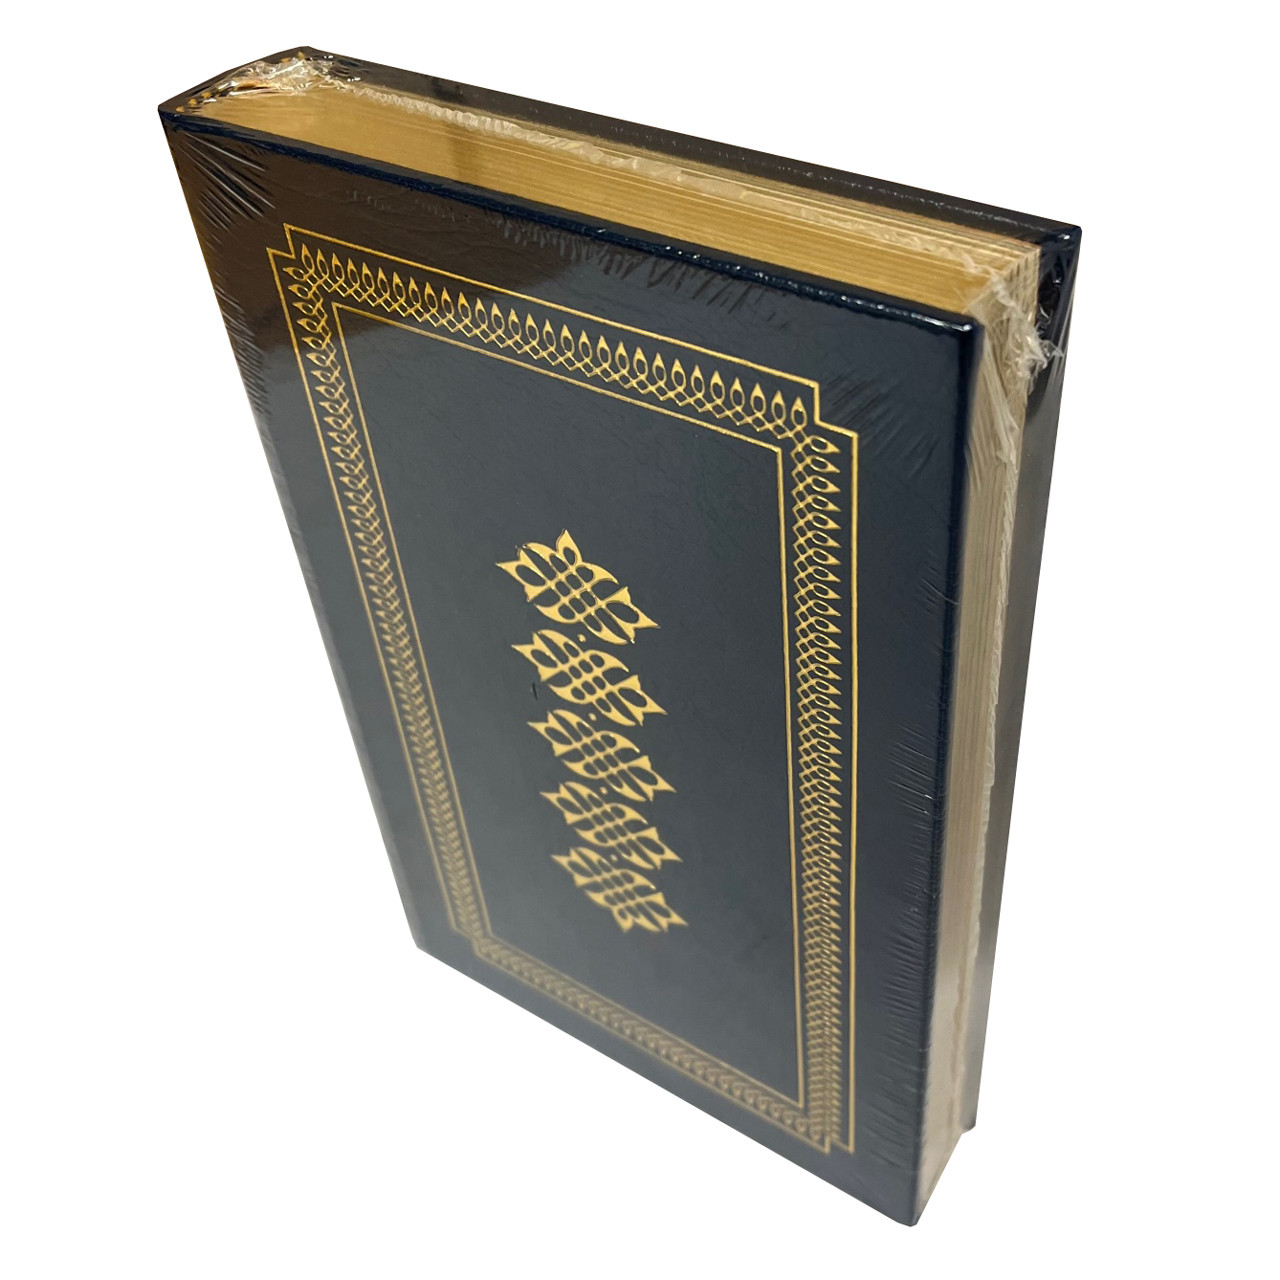 Catherine MacKenzie "Alexander Graham Bell: The Man who Contracted Space" Leather Bound Collector's Edition [Sealed]